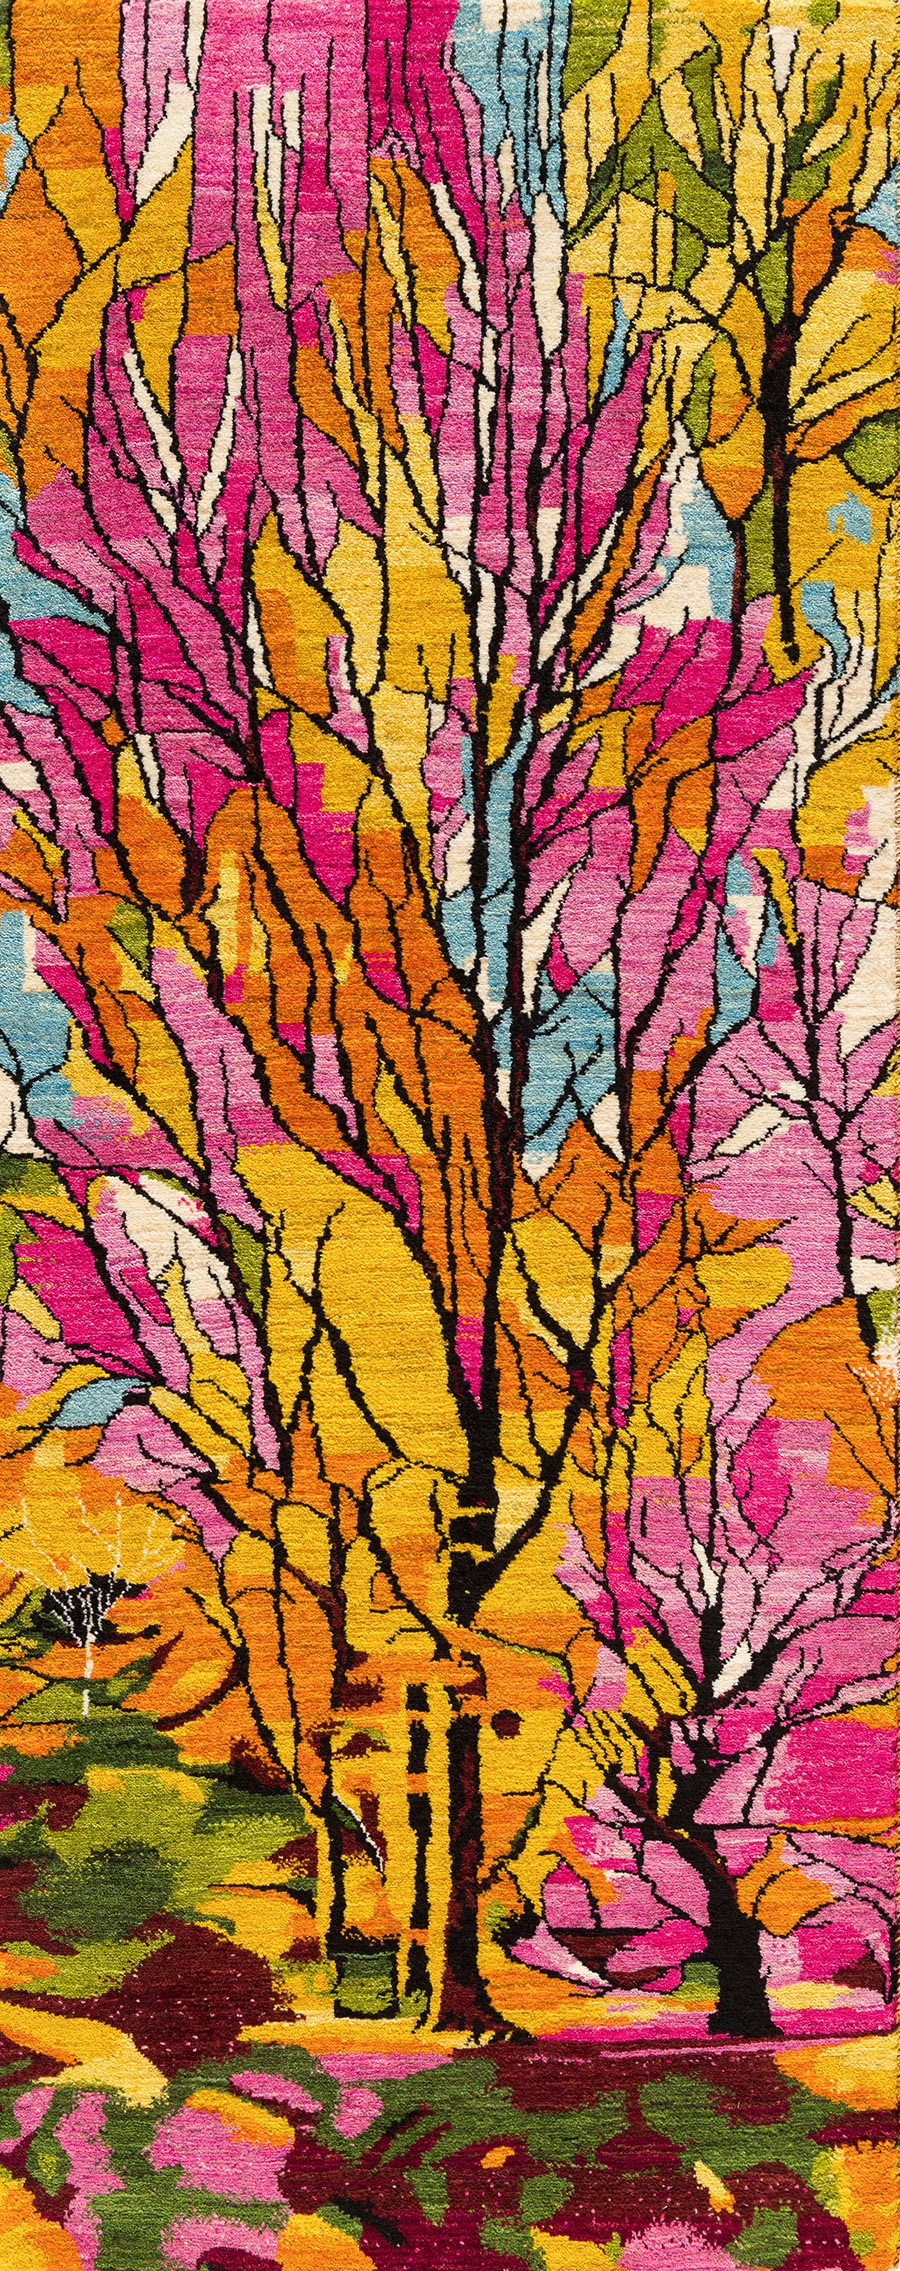 Autumnal Arboretum 1 runner Stained Glass Collection ZSFG 81 x 202cm